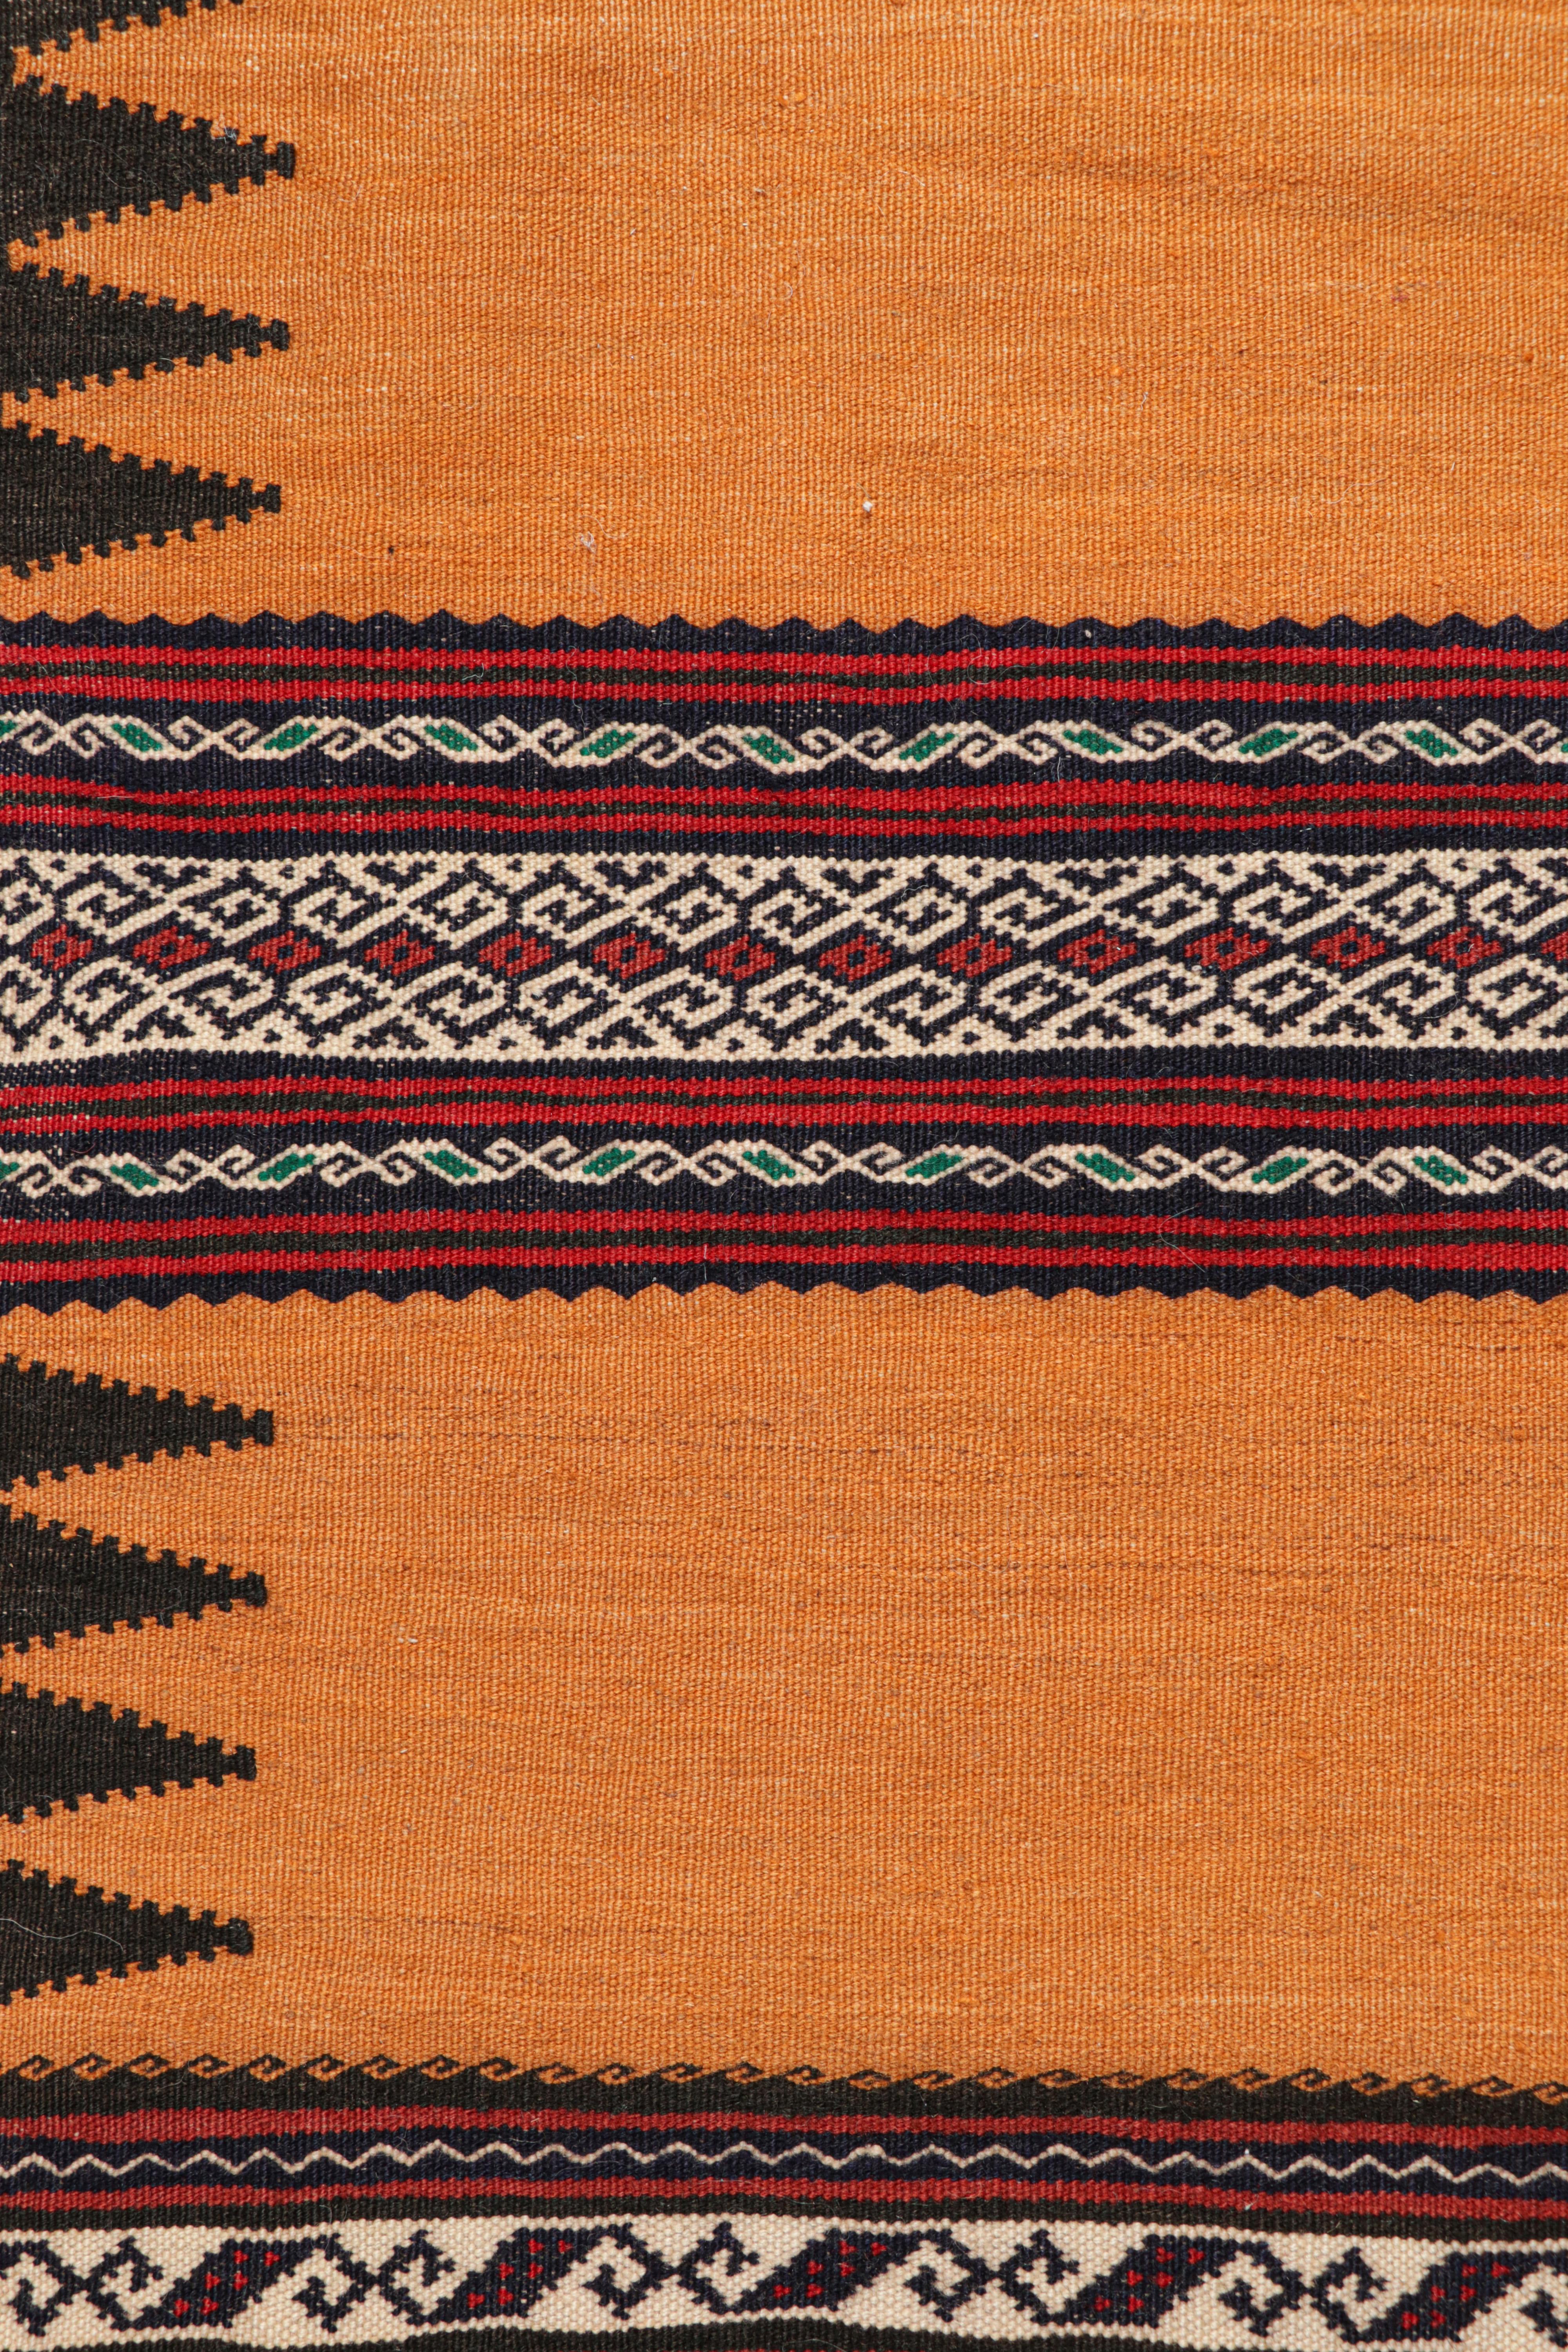 Tribal Vintage Afghan Kilim in Gold with Stripes & Geometric Patterns, from Rug & Kilim For Sale